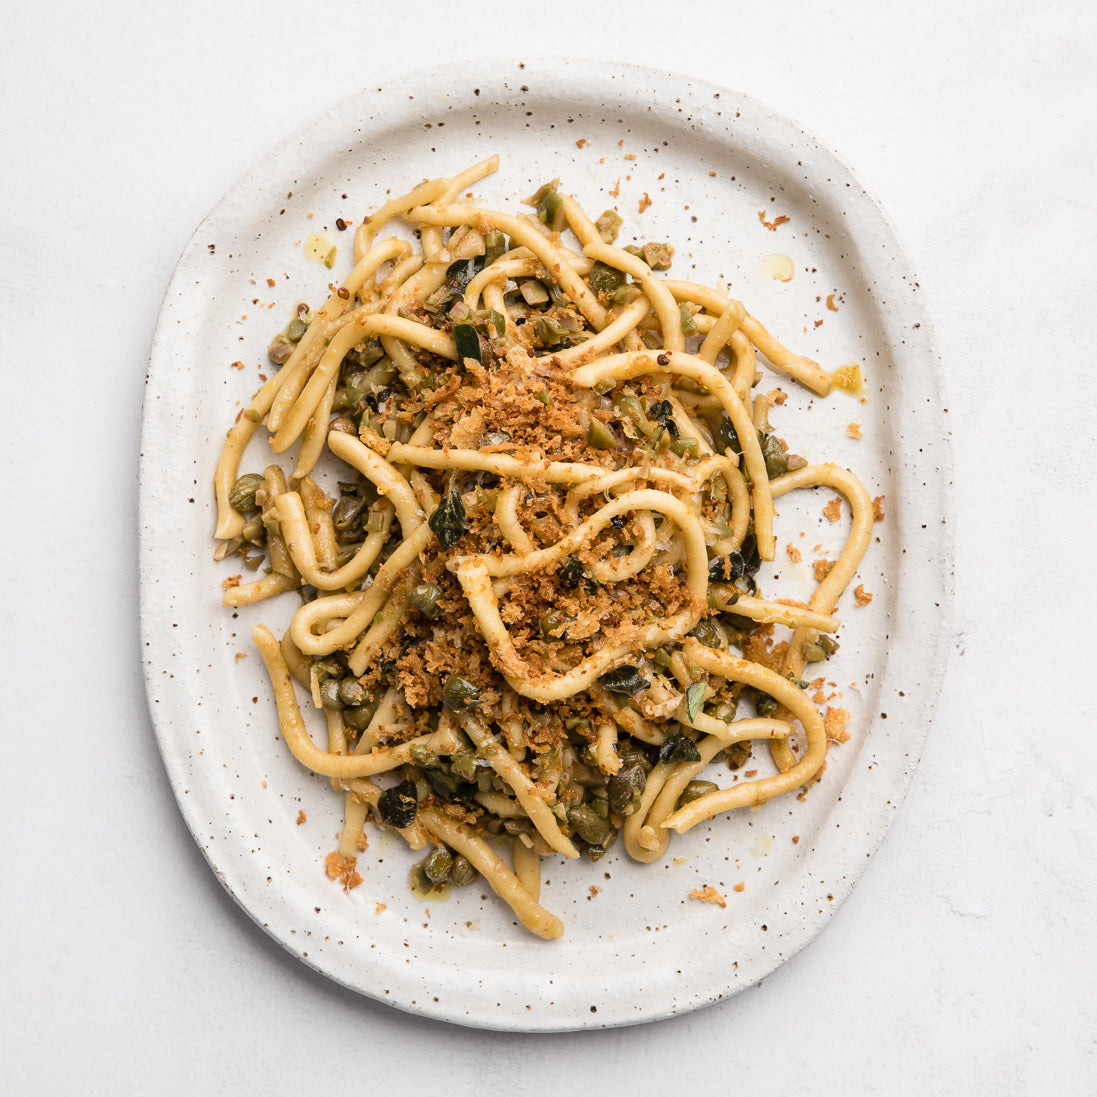 Elizabeth Hewson's Anchovy, Garlic, Capers & Green Olive Pici